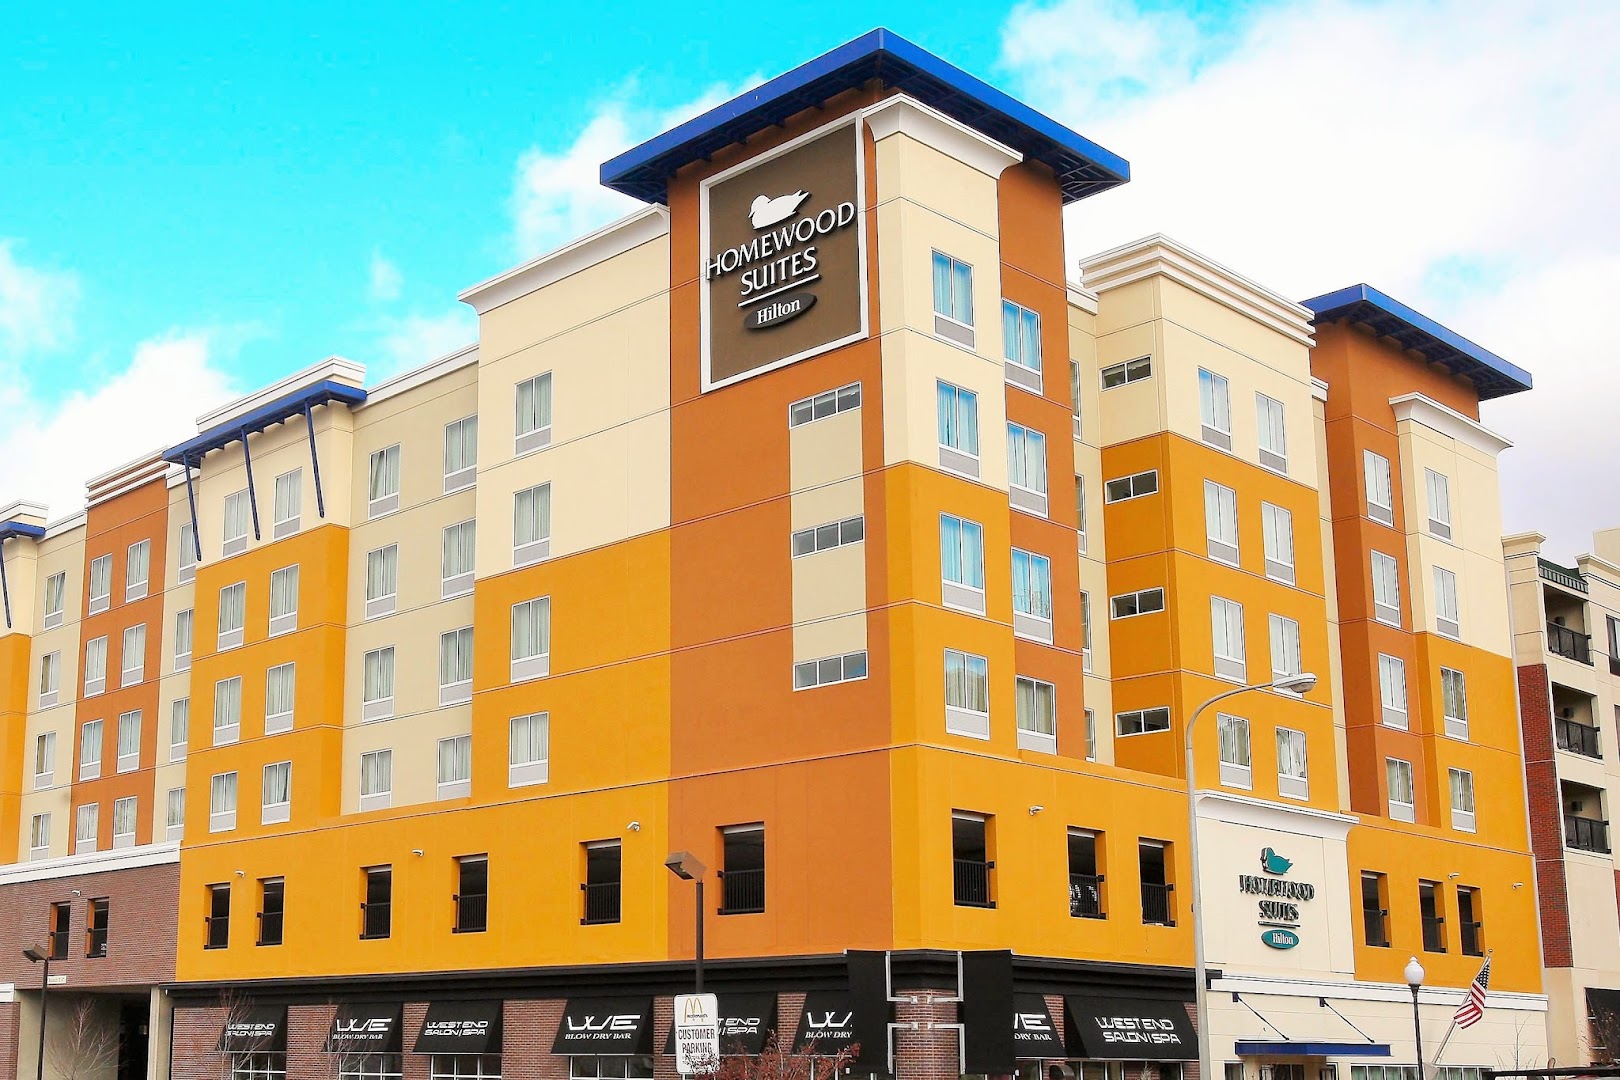 Homewood Suites by Hilton Rochester Mayo Clinic - Saint Marys Campus